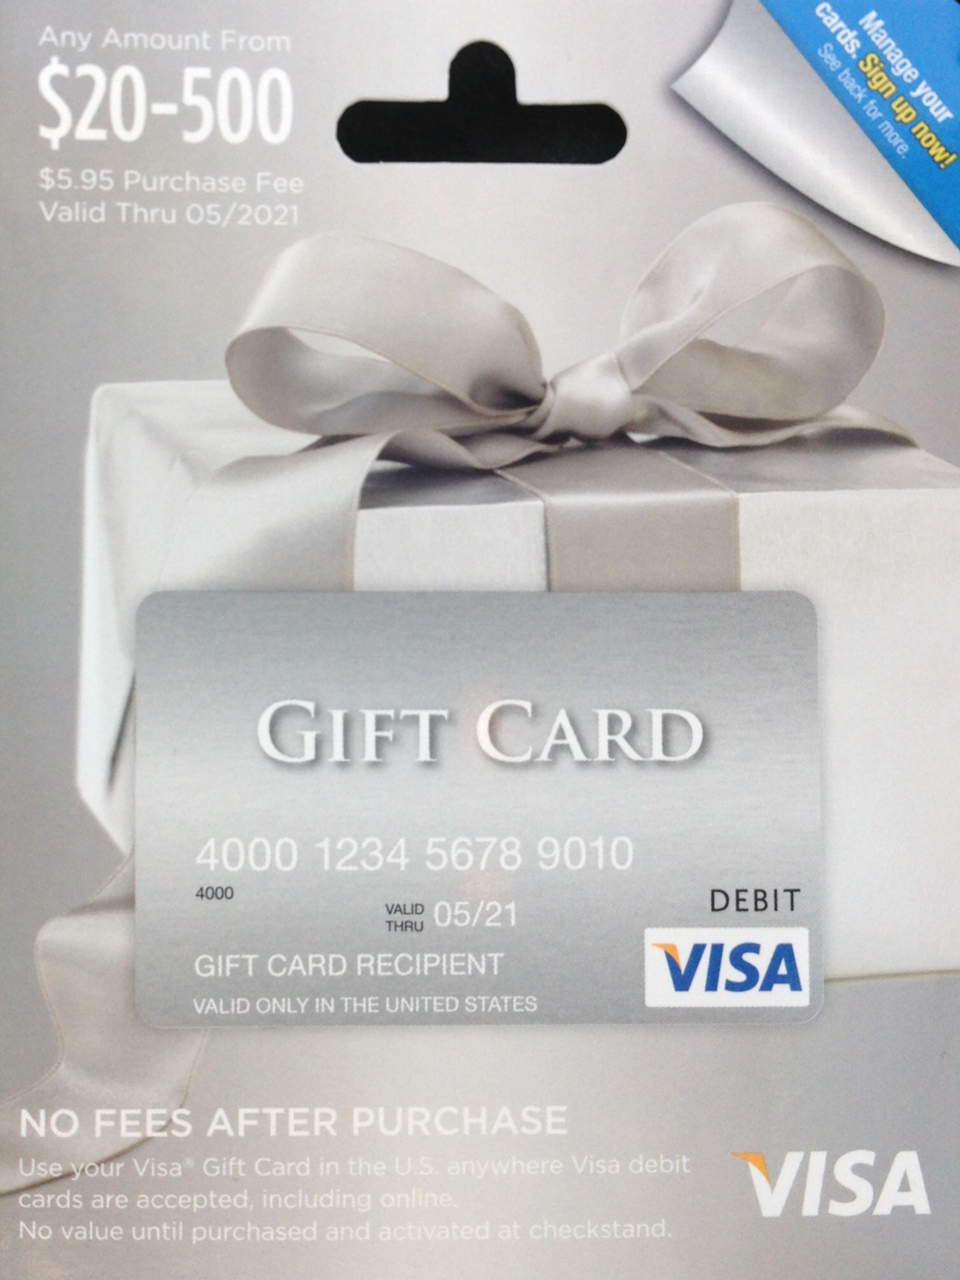 How can you check the balance of a Visa gift card?